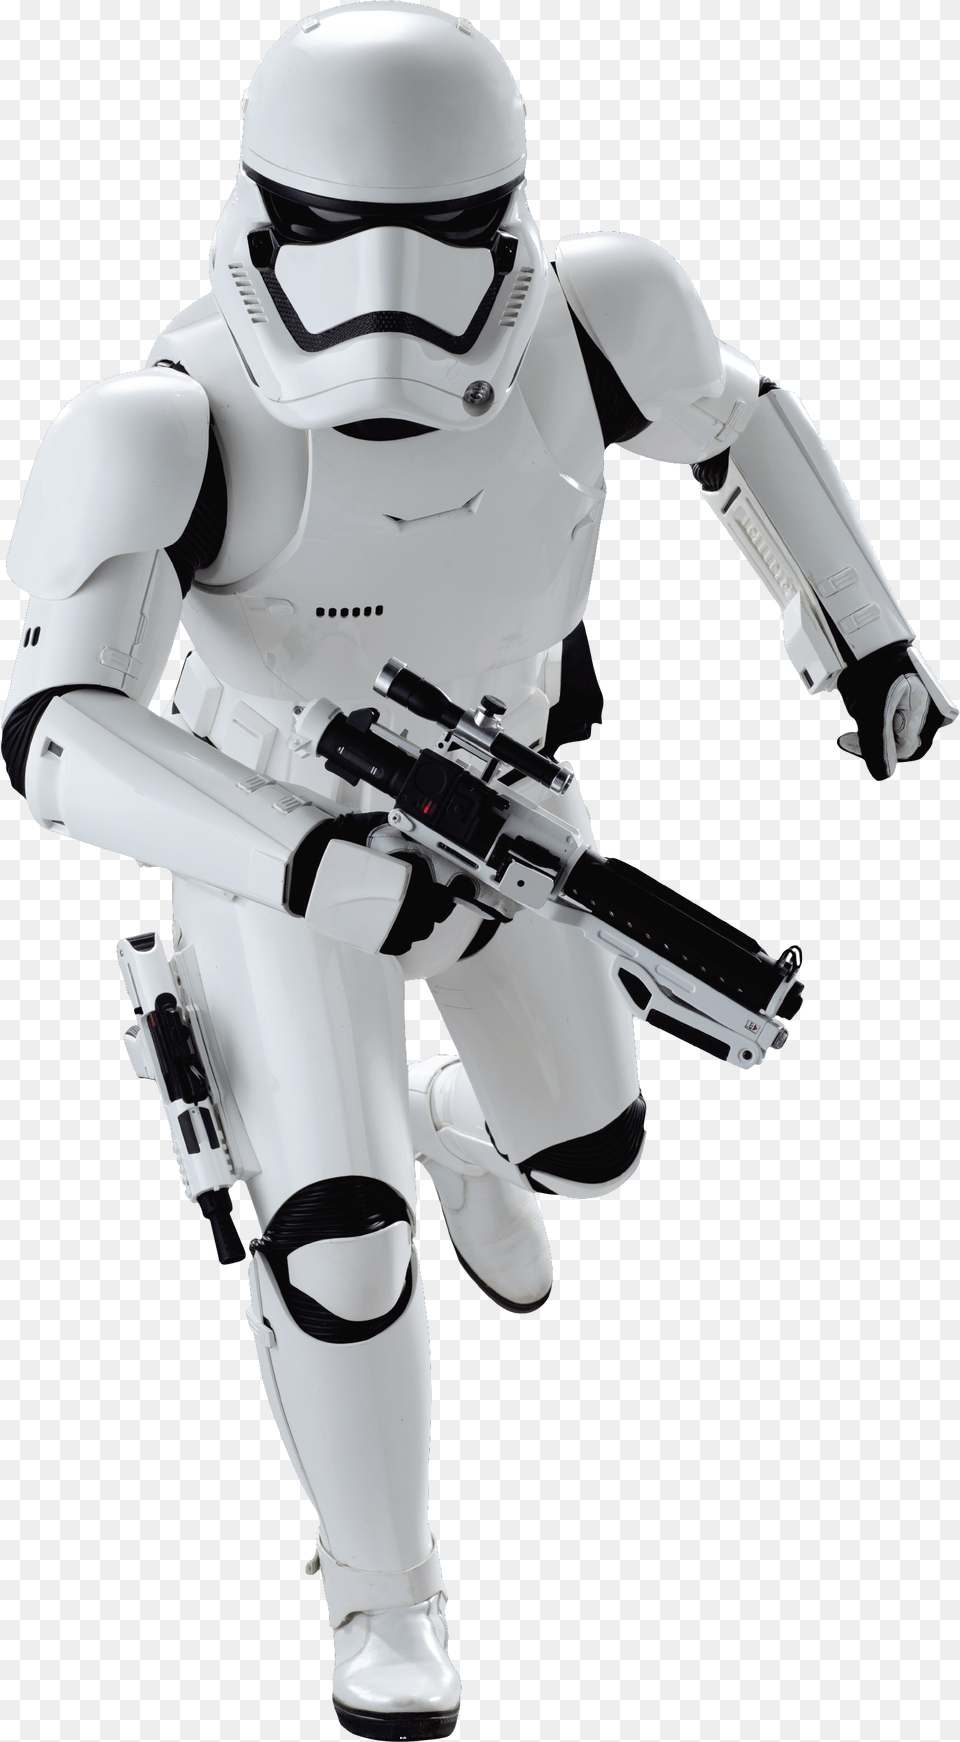 Stormtrooper Star Wars Picture Star Wars Stormtrooper, Robot, Adult, Female, Person Png